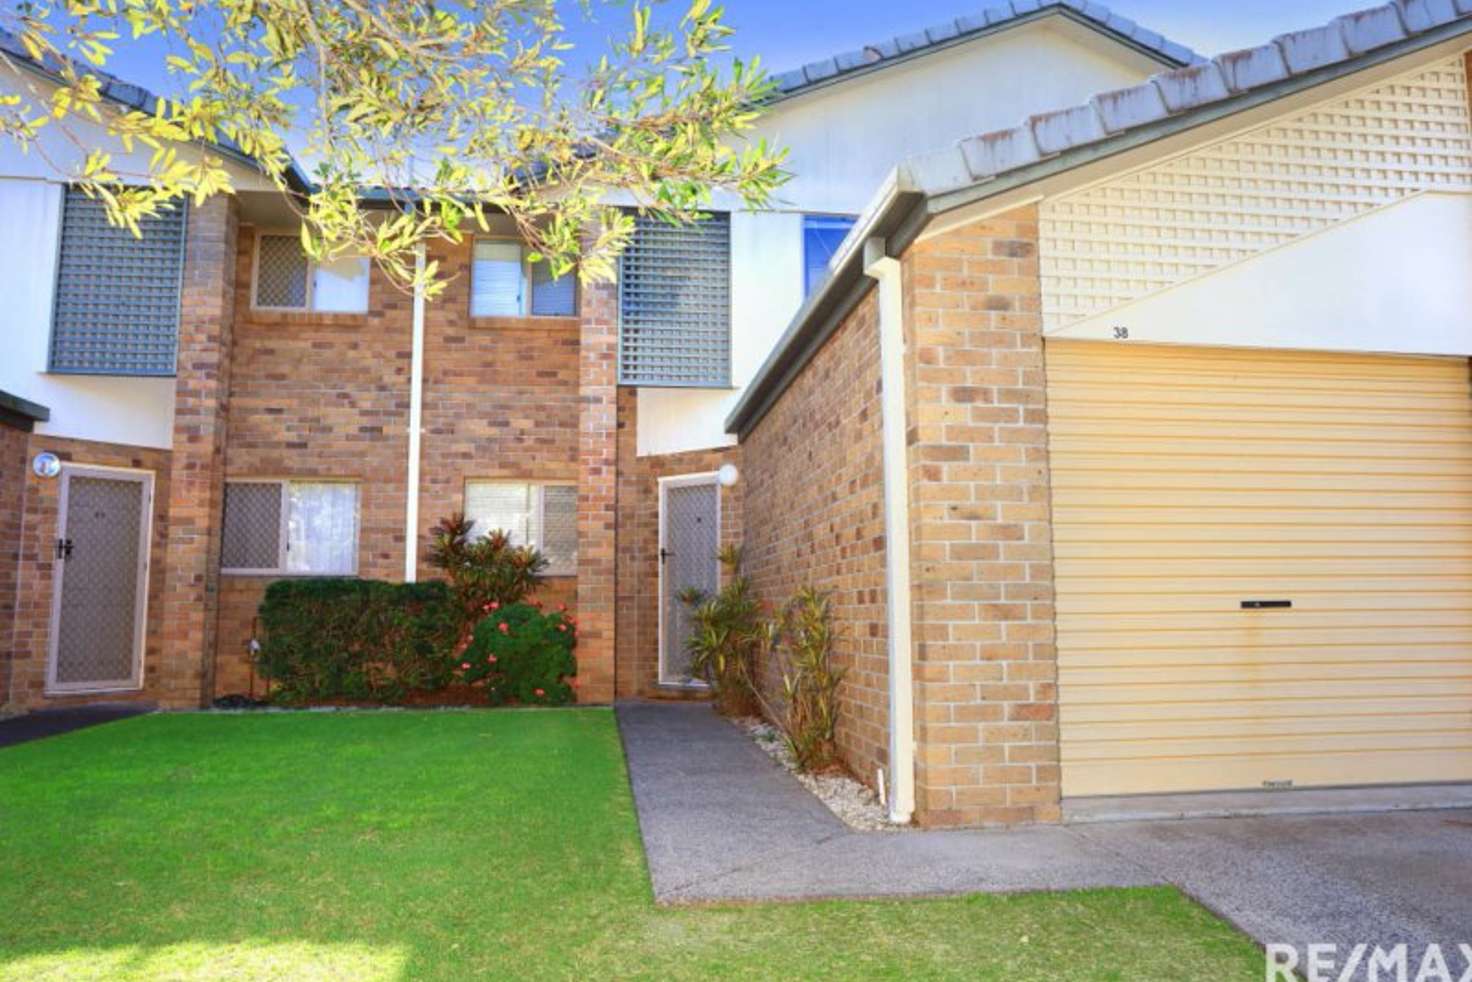 Main view of Homely townhouse listing, 38/14 Bourton Rd, Merrimac QLD 4226